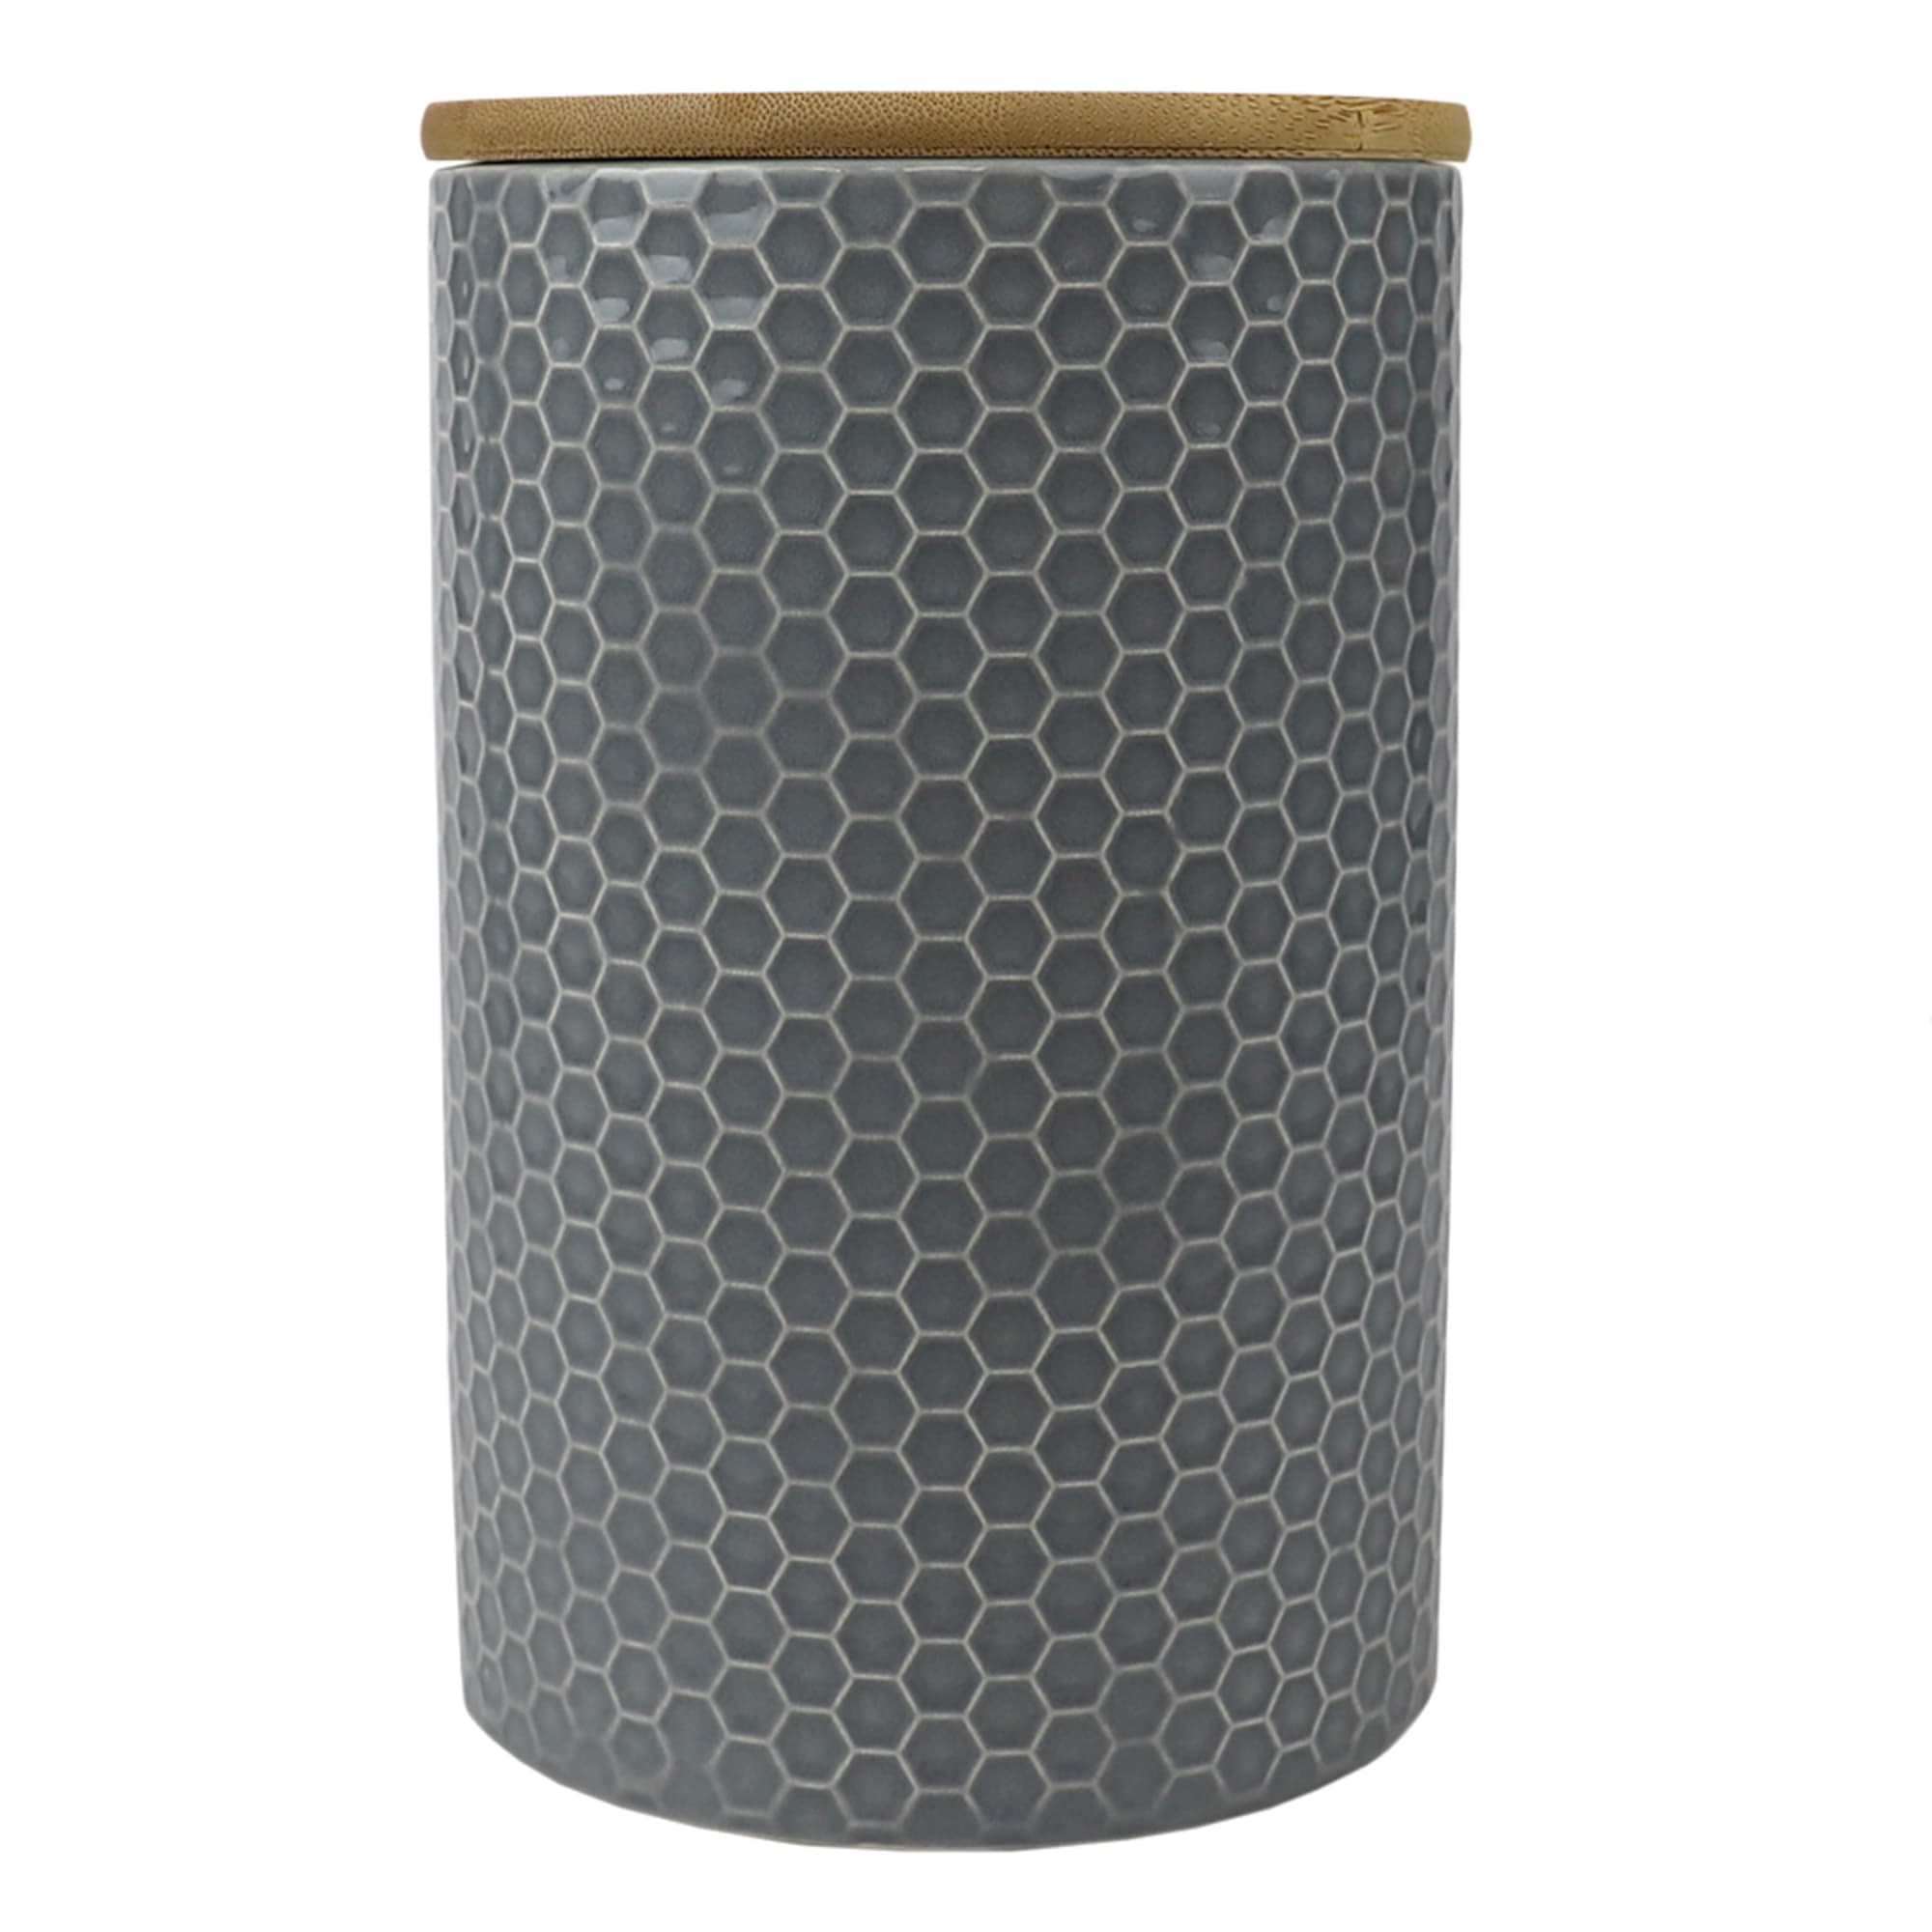 Home Basics Honeycomb Large Ceramic Canister, Grey $7.00 EACH, CASE PACK OF 12